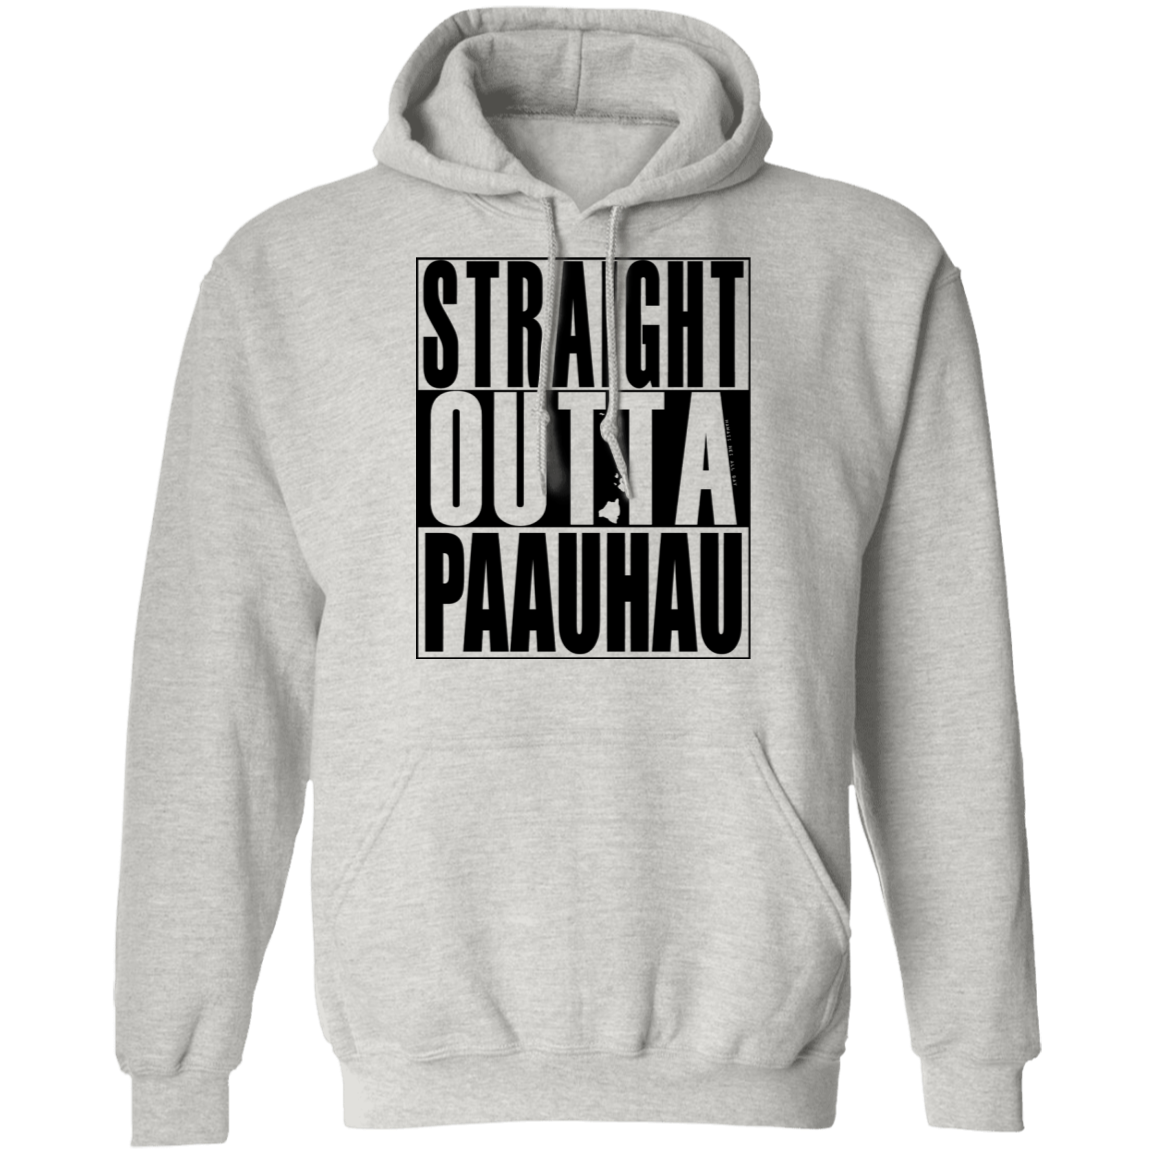 Straight Outta Paahau (black ink) Pullover Hoodie